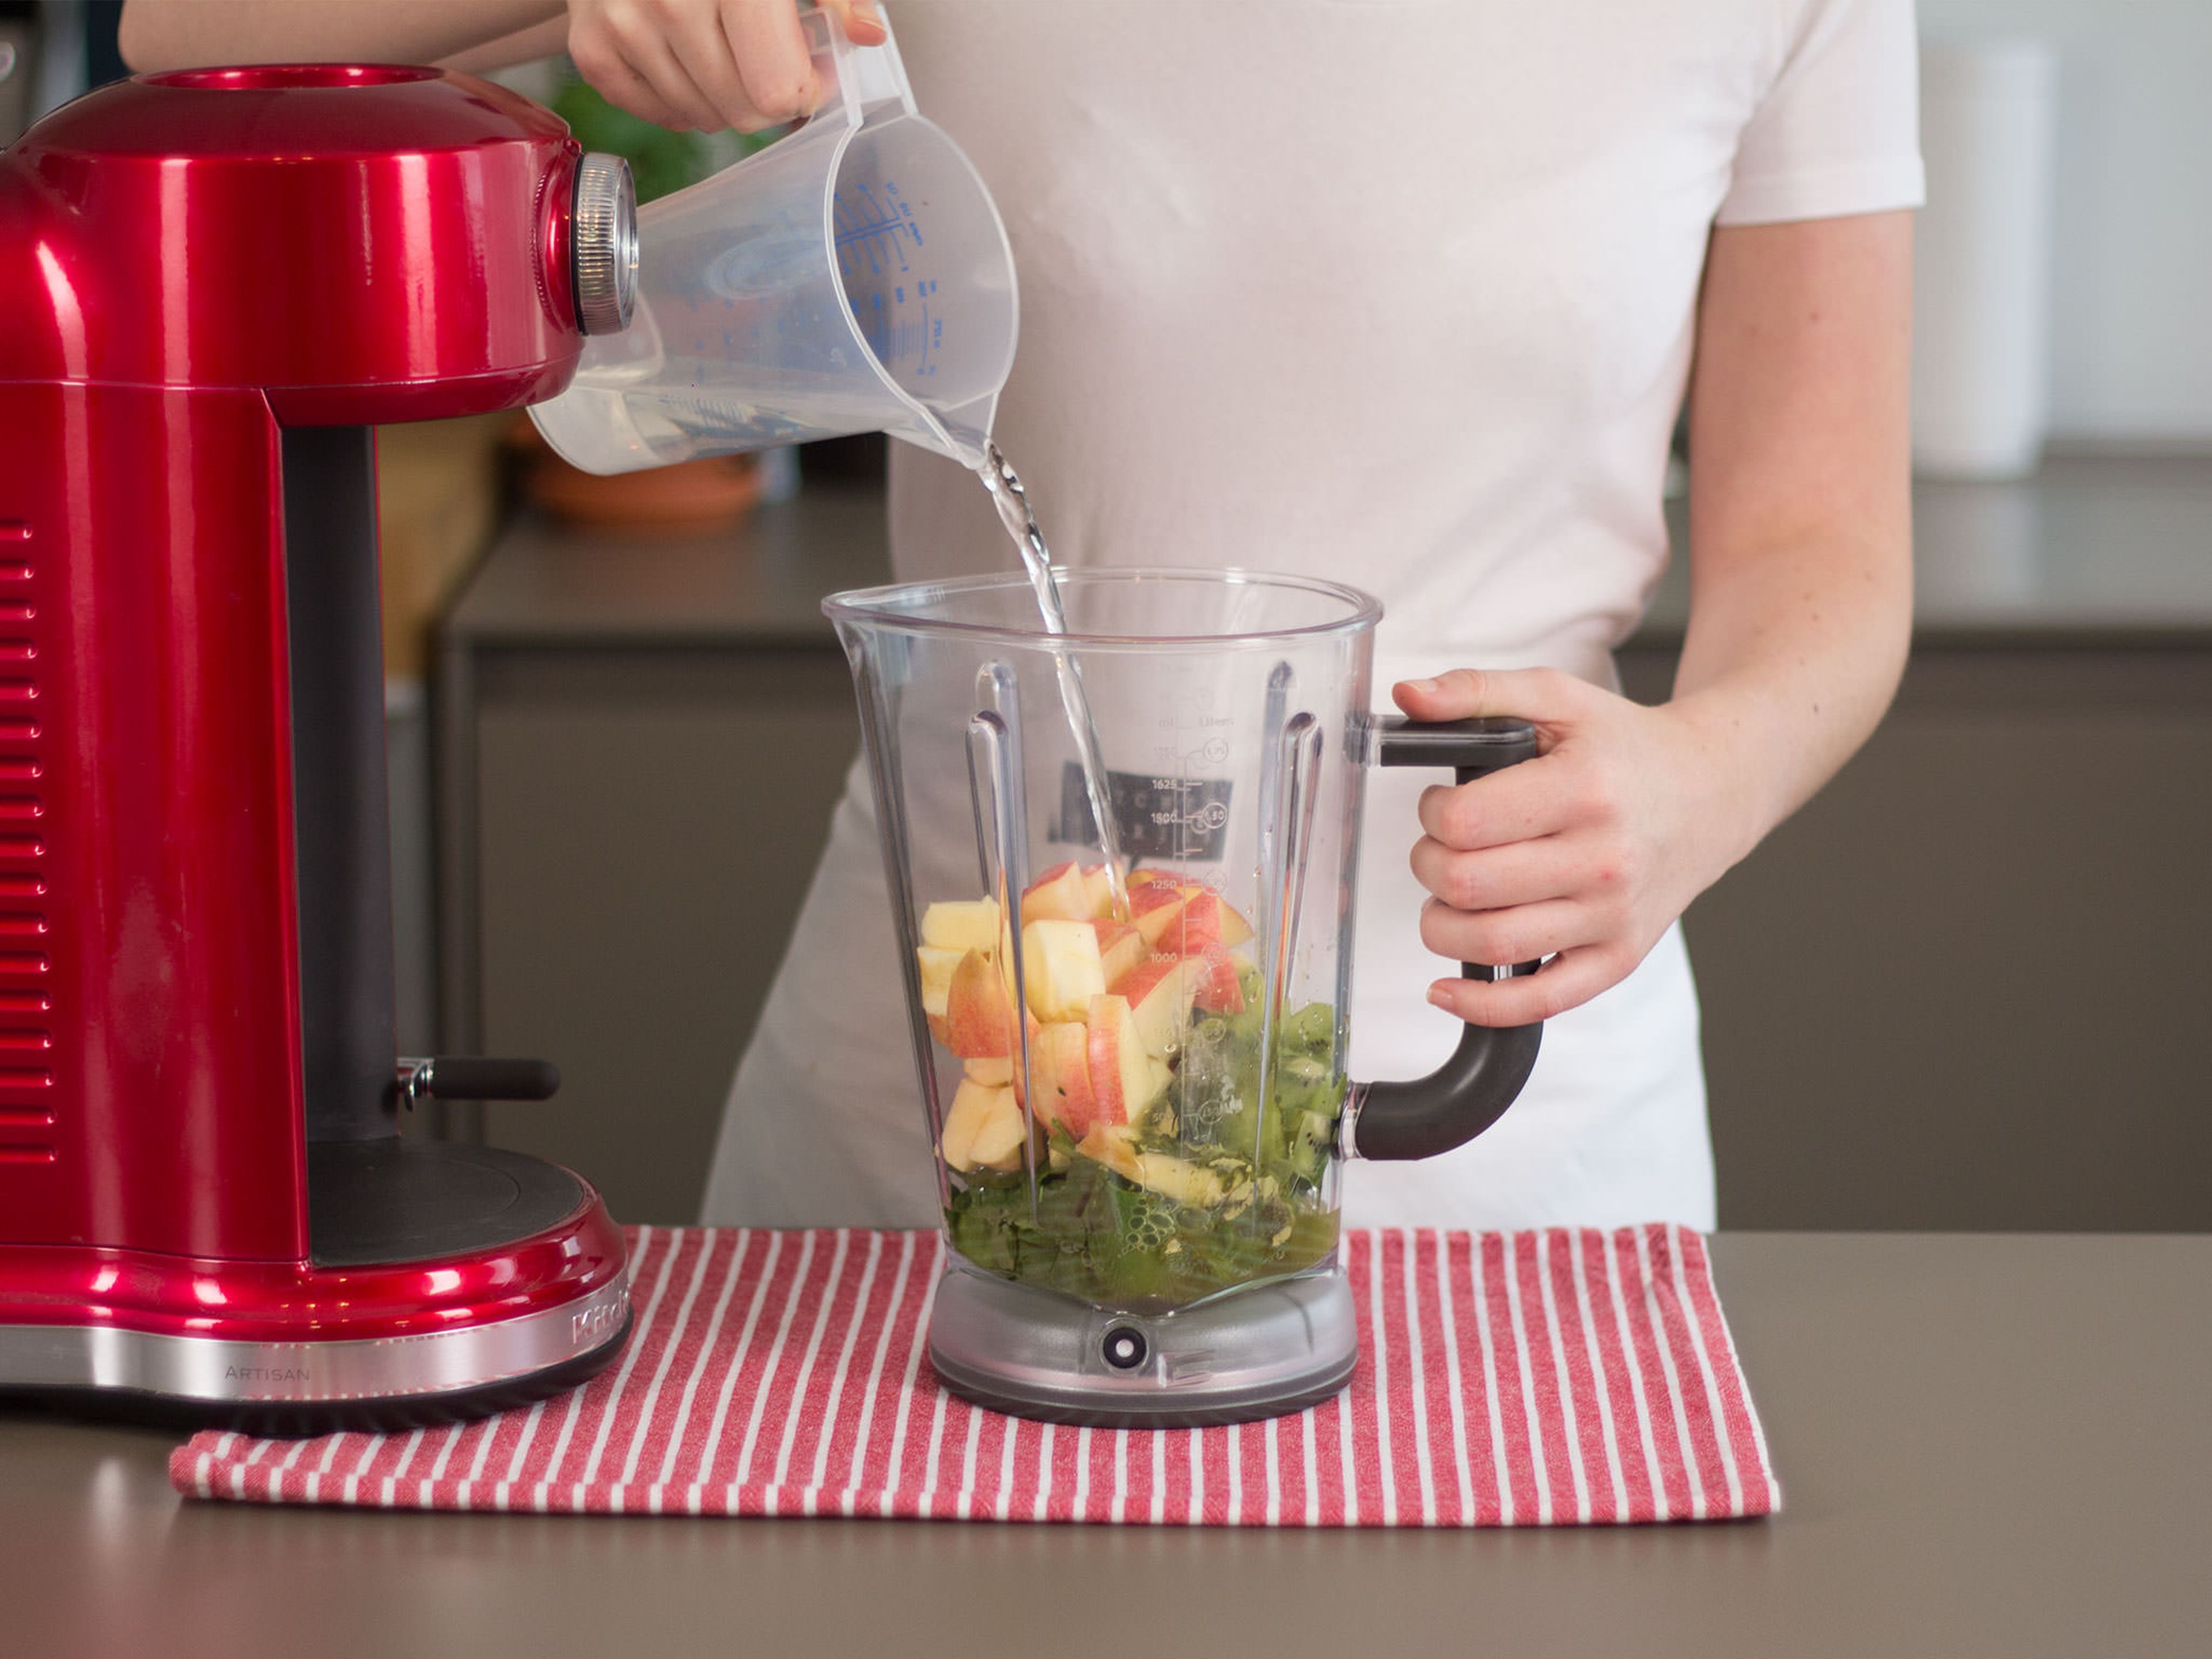 Add apple, kiwi, spinach, agave nectar, mint, matcha powder, and water to blender. Blend for approx. 1 – 2 min. until smooth. Enjoy!